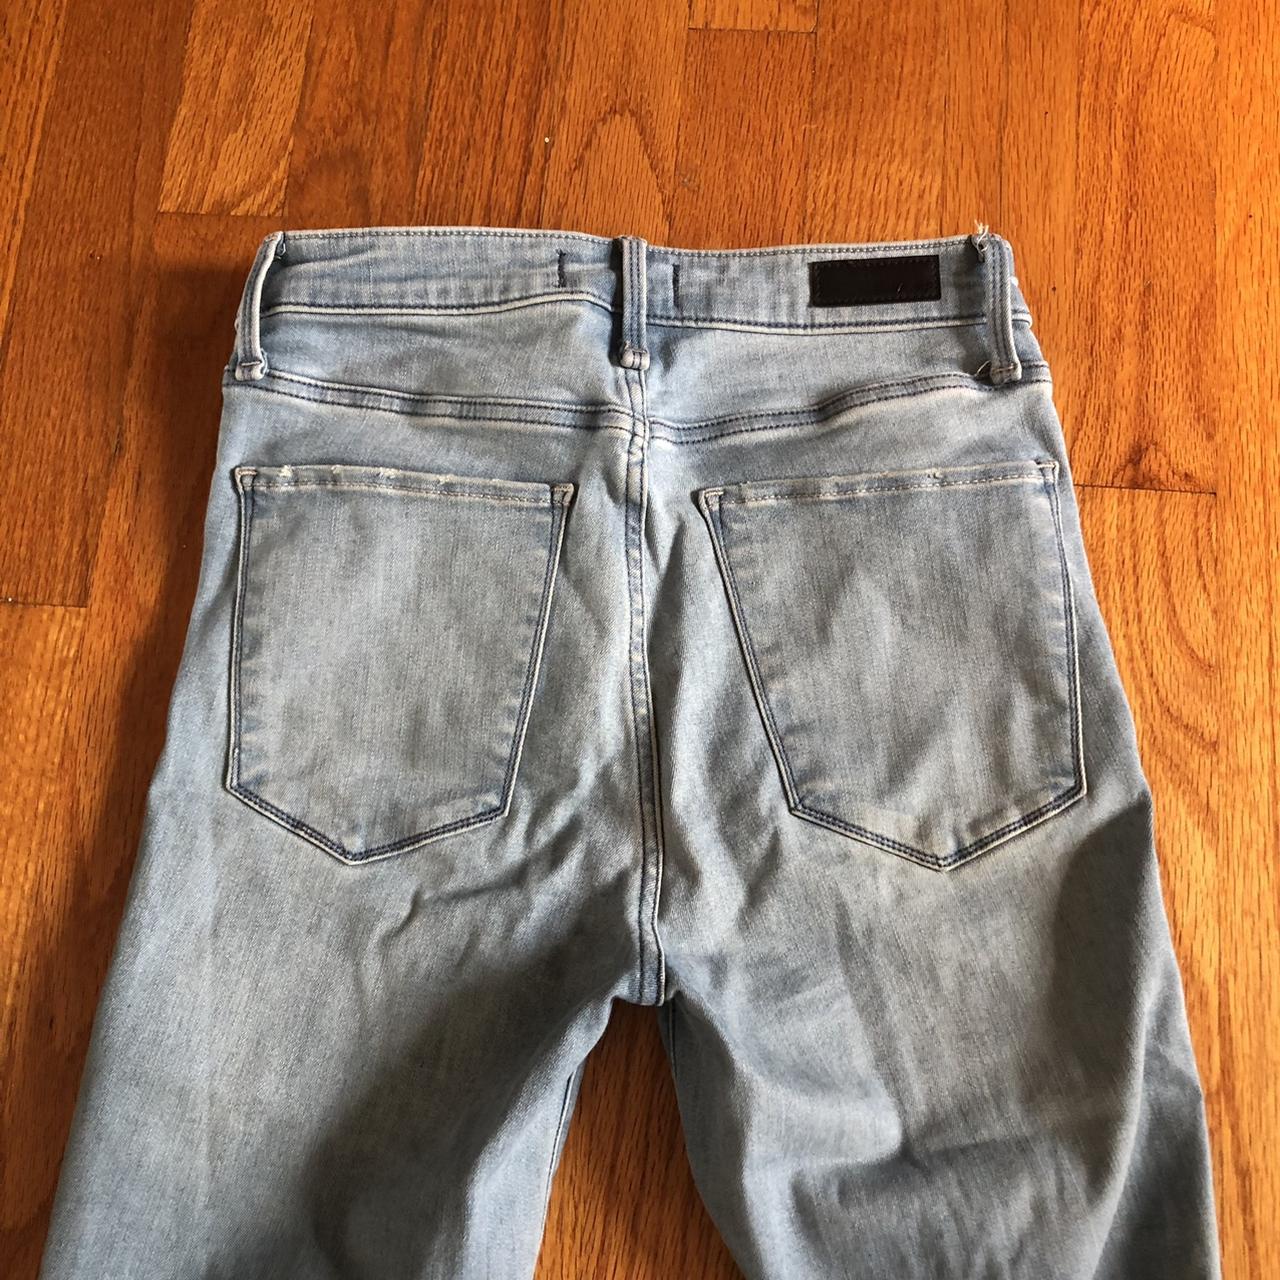 Abercrombie & Fitch high rise skinny jeans with... - Depop